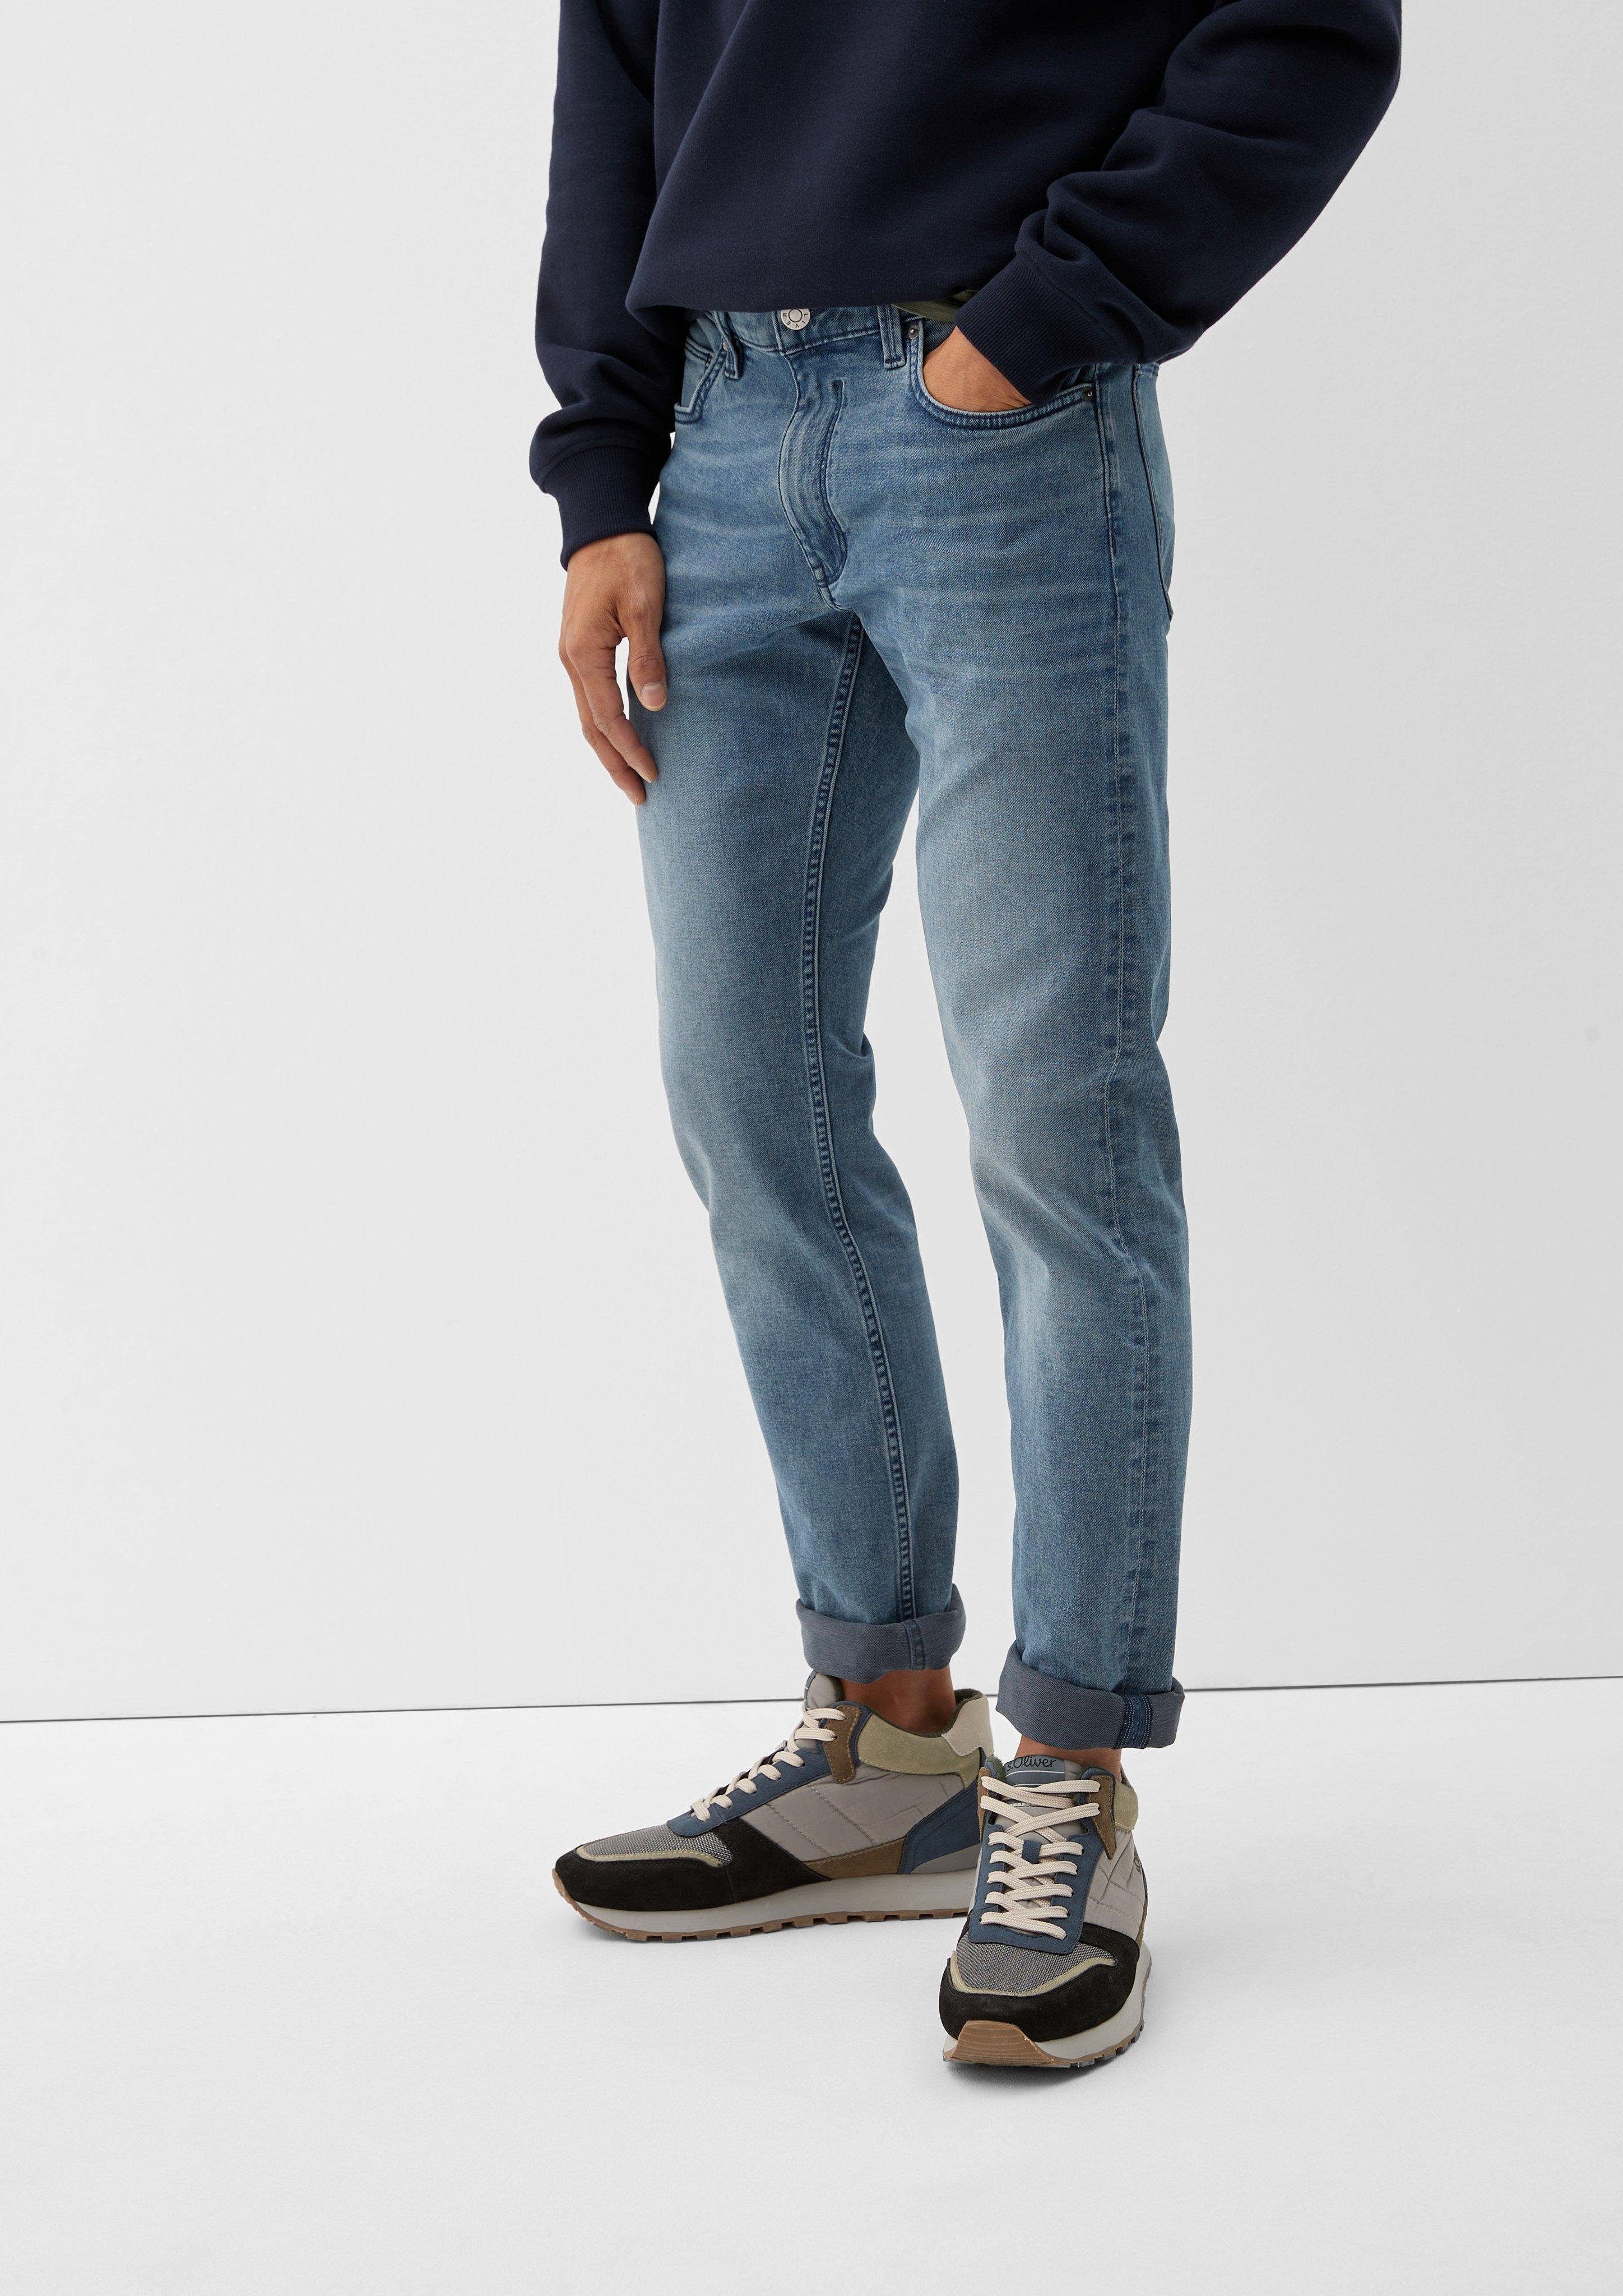 / Jeans Stoffhose Slim Waschung, Leder-Patch / Carson s.Oliver / Mid Leg Rise Tapered Fit